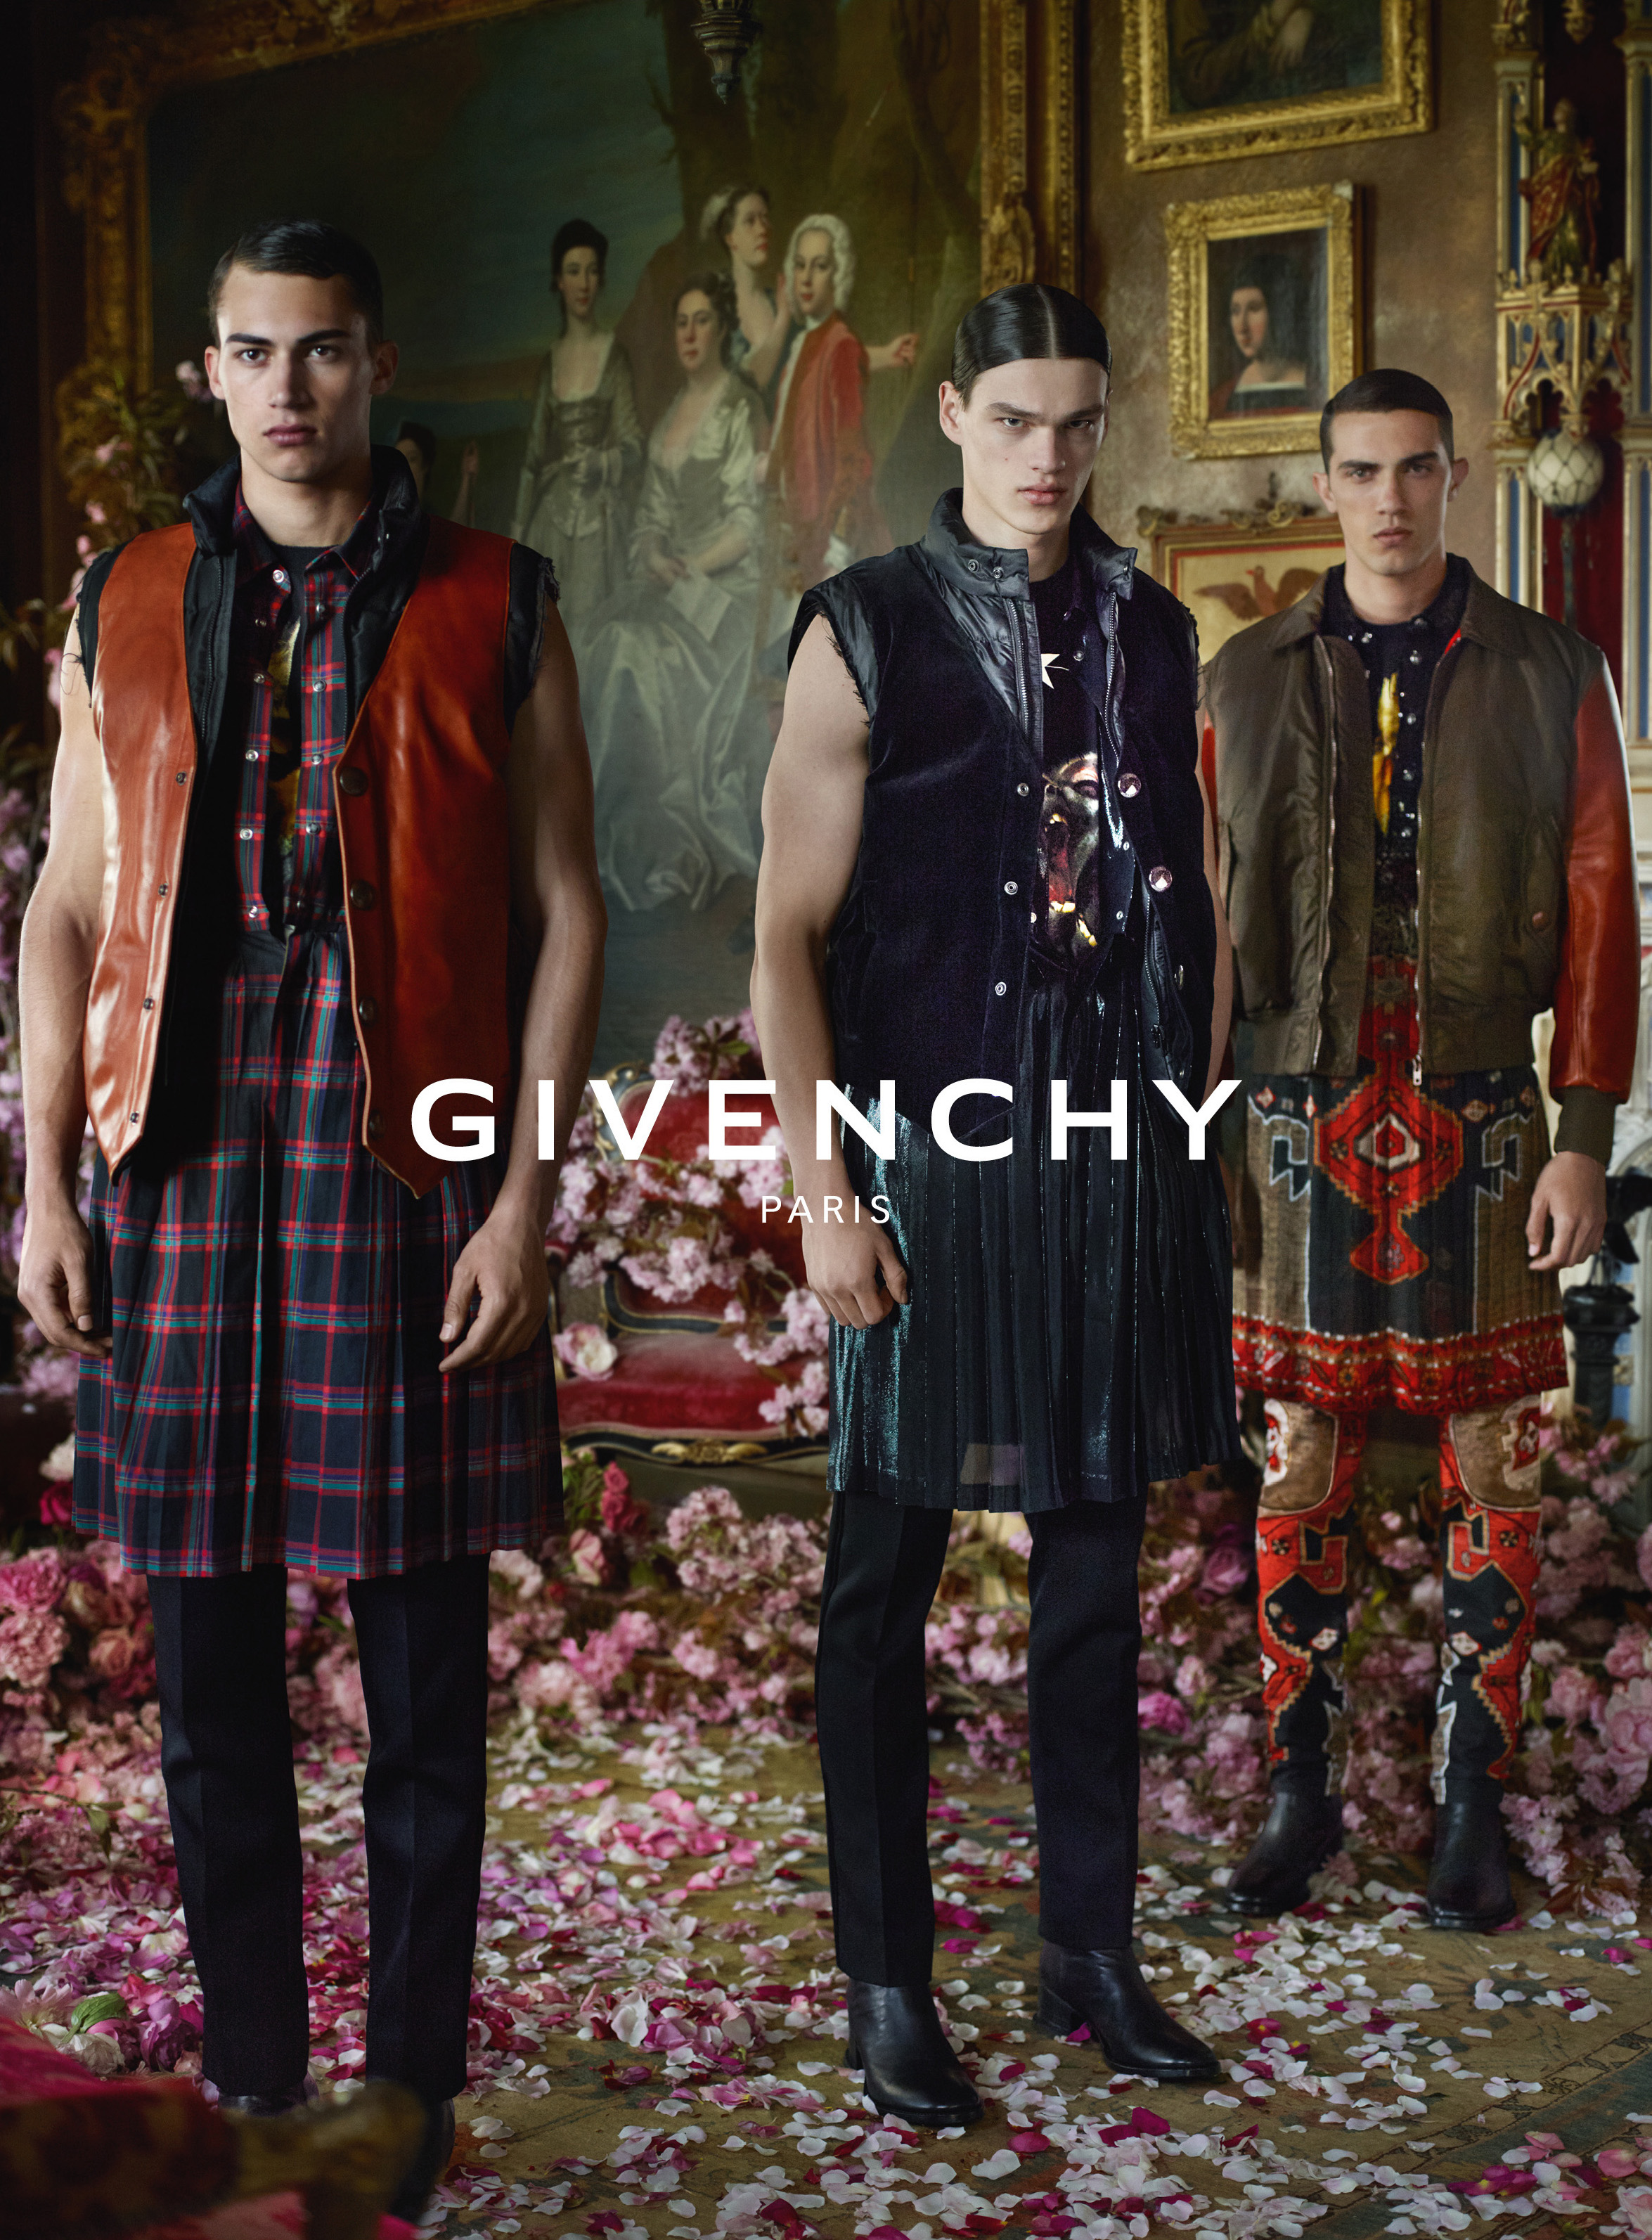 Alessio Pozzi, Filip Hrivnak and Lucas Cantao star in Givenchy's fall-winter 2015 menswear advertising campaign.